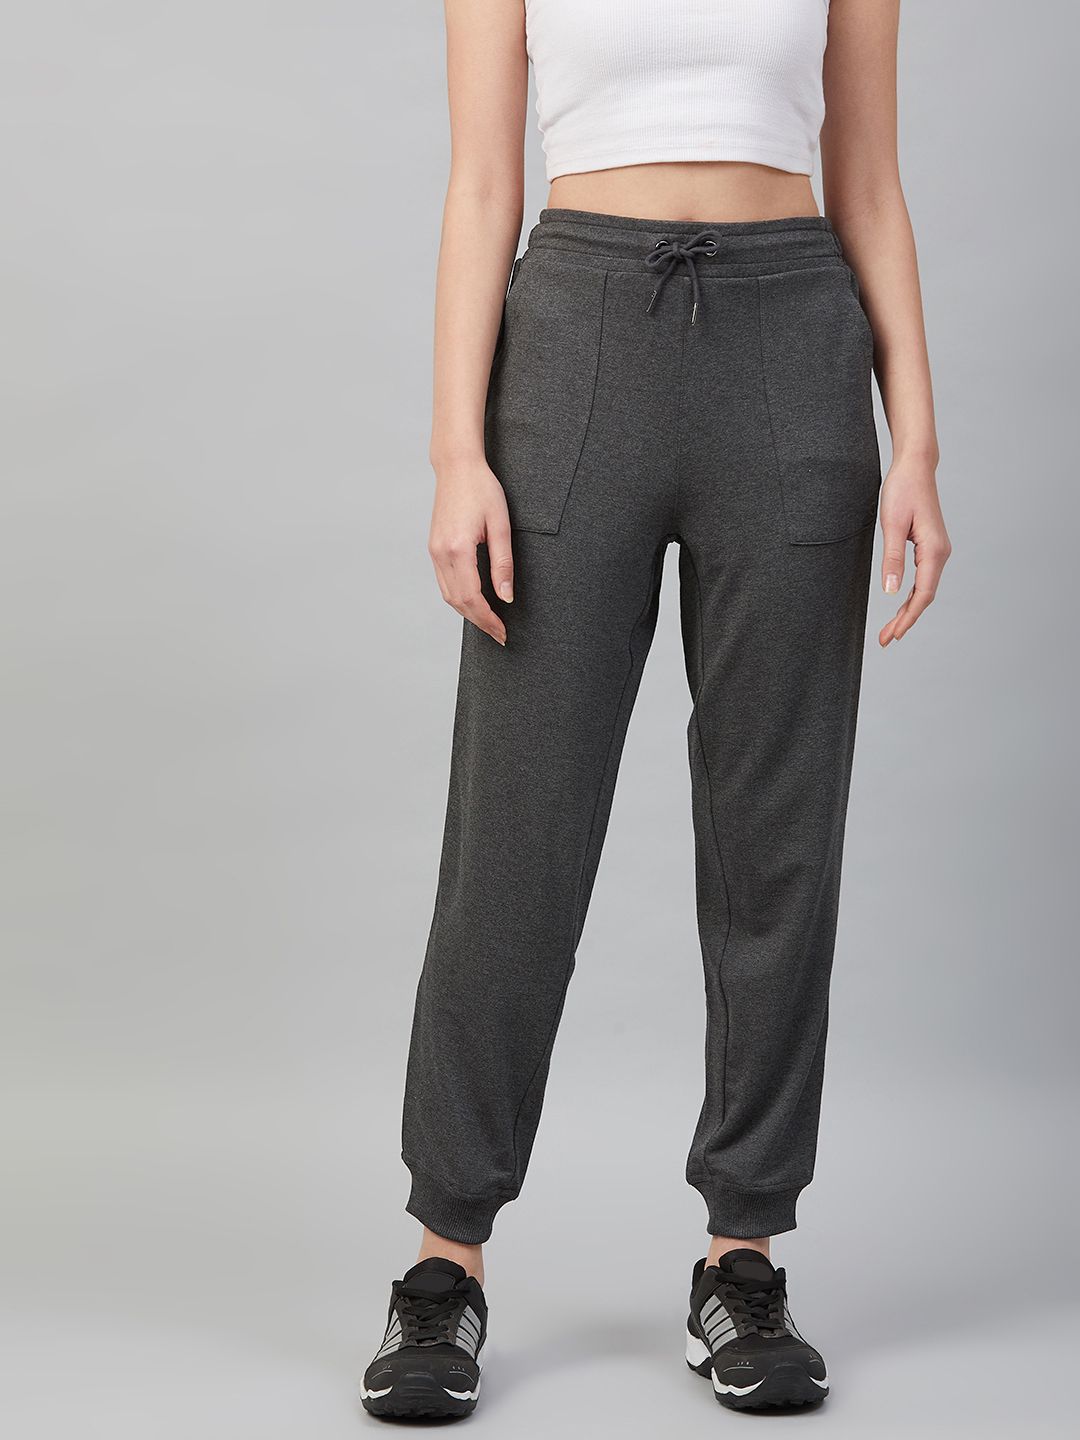 Marks & Spencer Women Charcoal Grey Solid Joggers Price in India